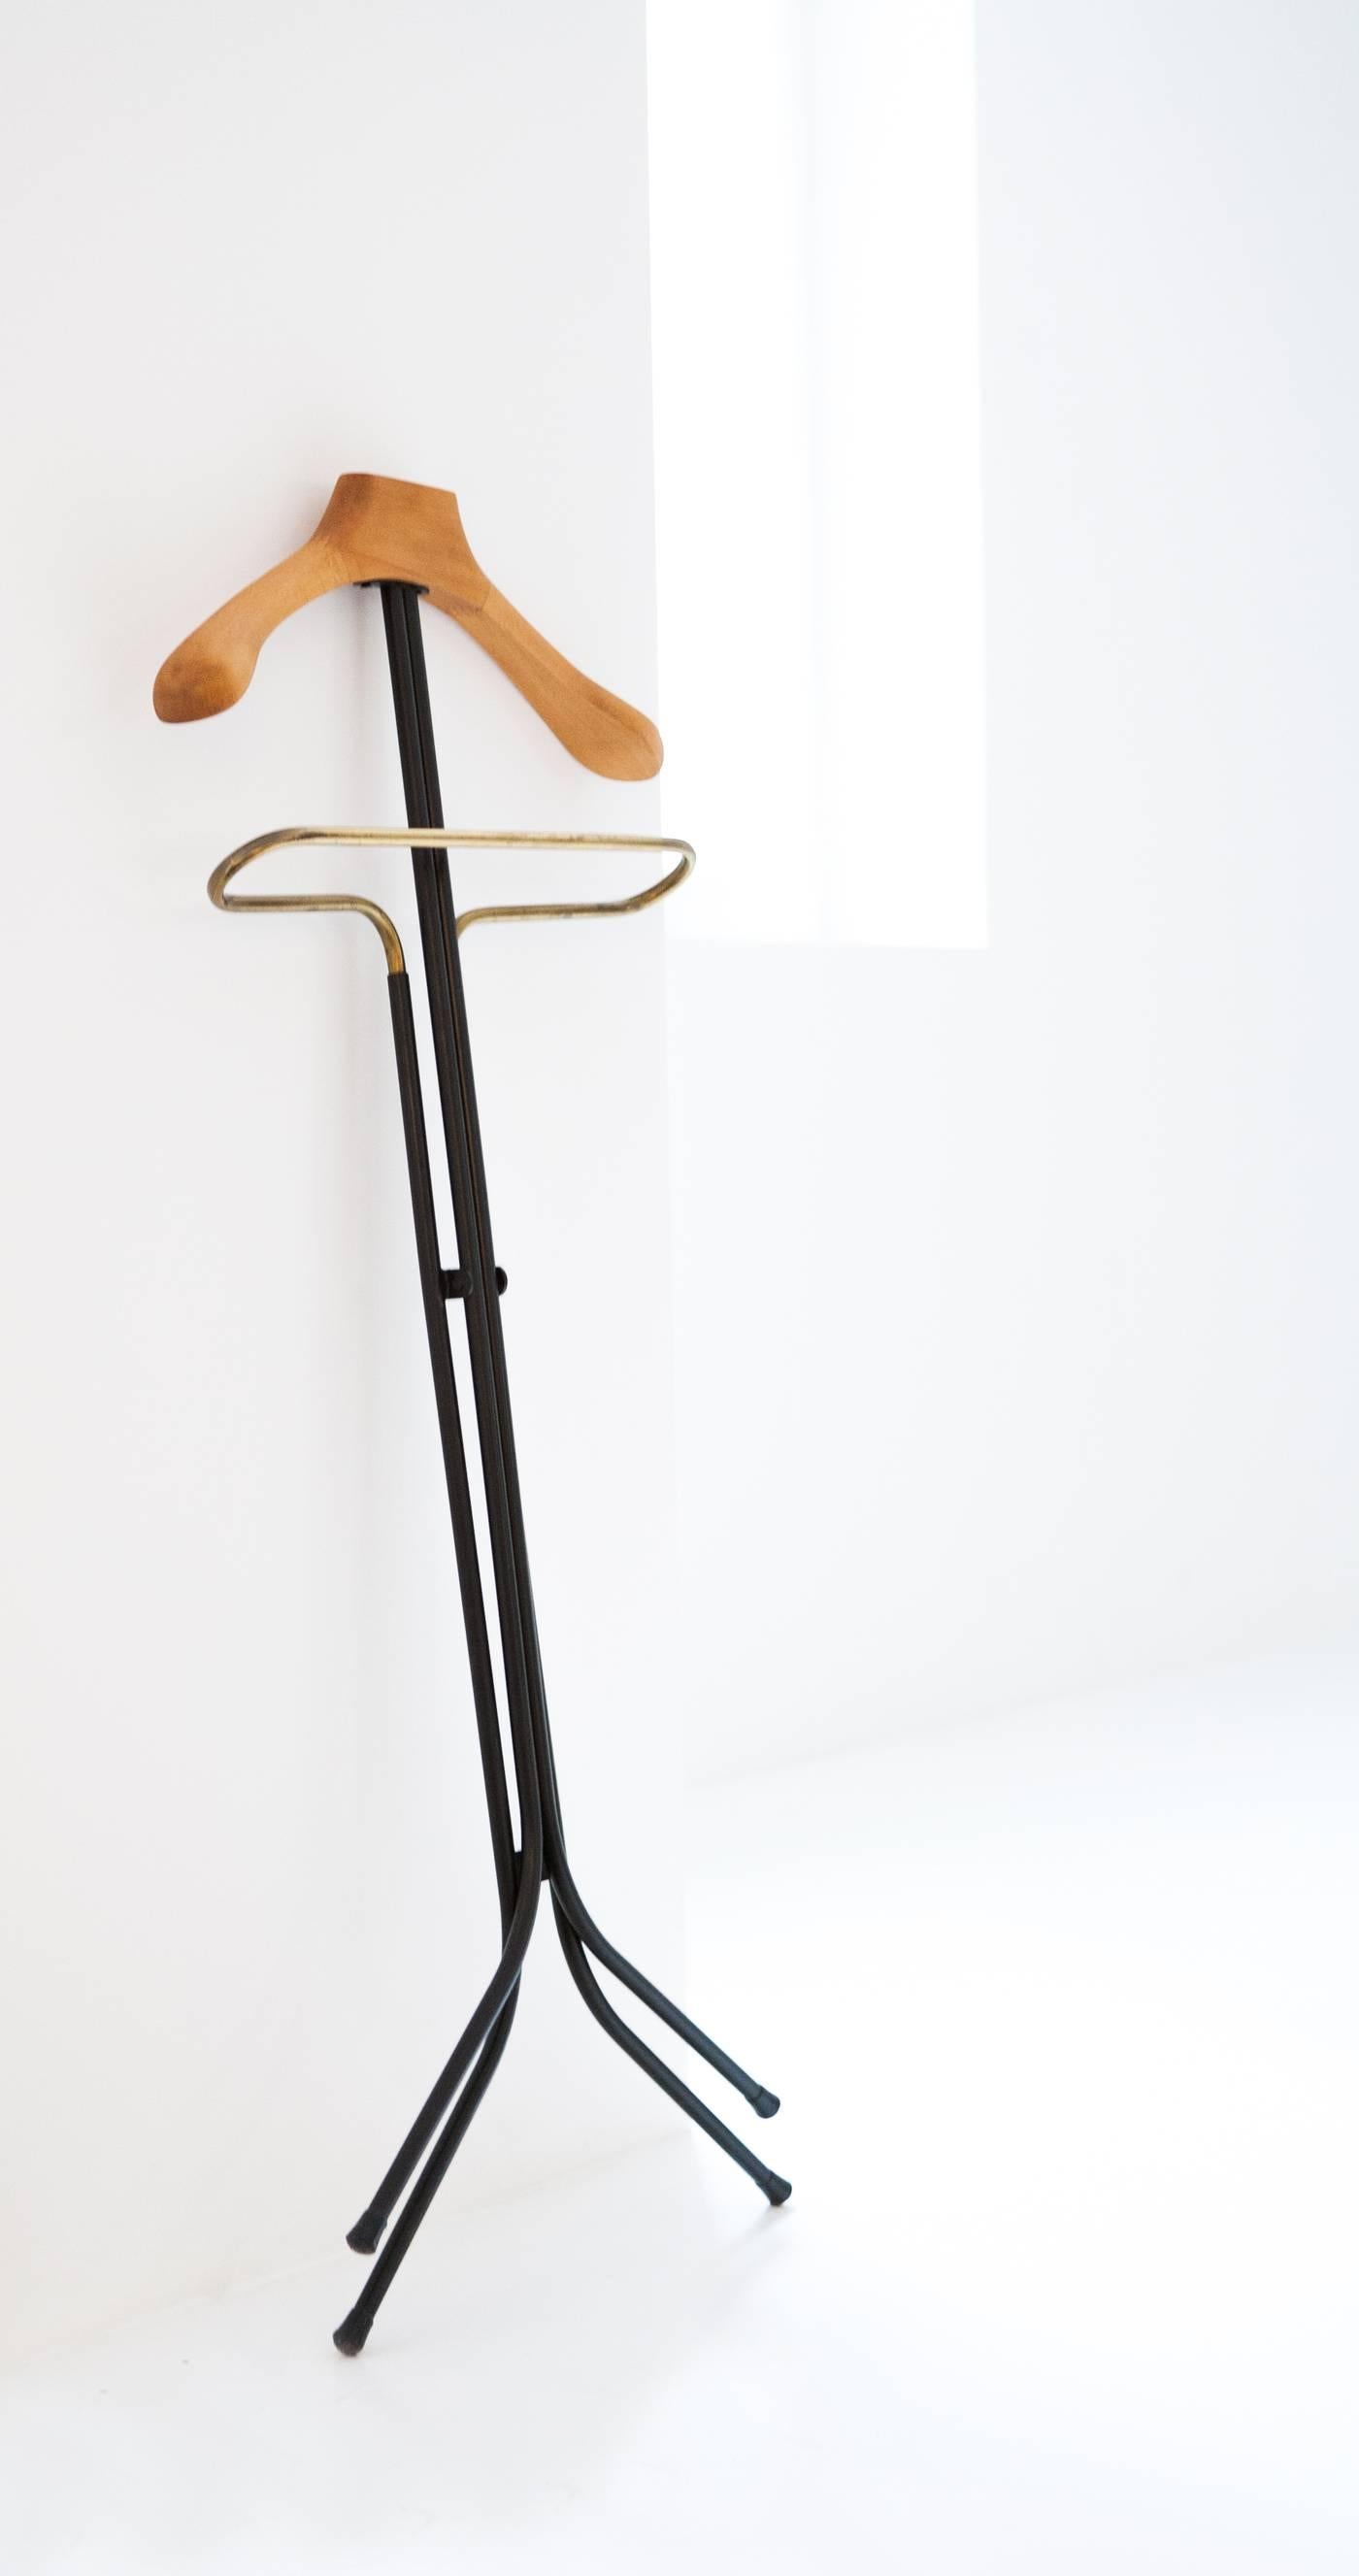 A modern coat stand manufactured in Italy during the 1950s
Made of brass, wood and black enameled iron.
Fully restored, only the brass is with its original patina.